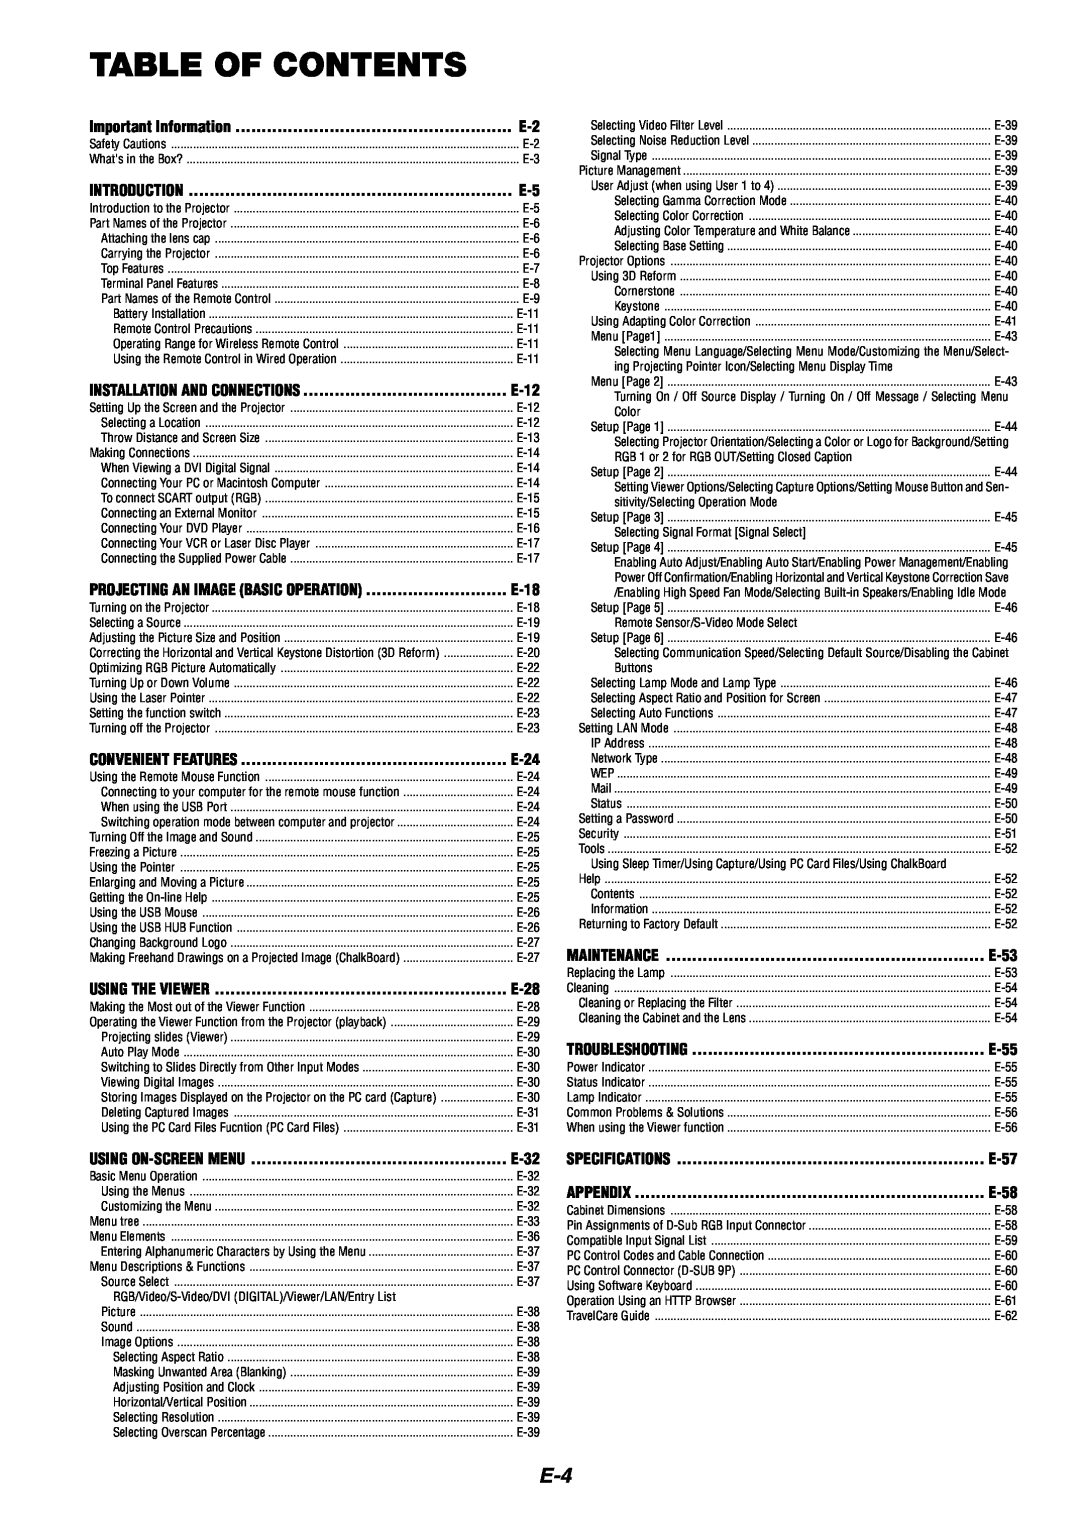 NEC MT1060 Table Of Contents, Important Information, Introduction, Using The Viewer, Maintenance, Specifications, Appendix 